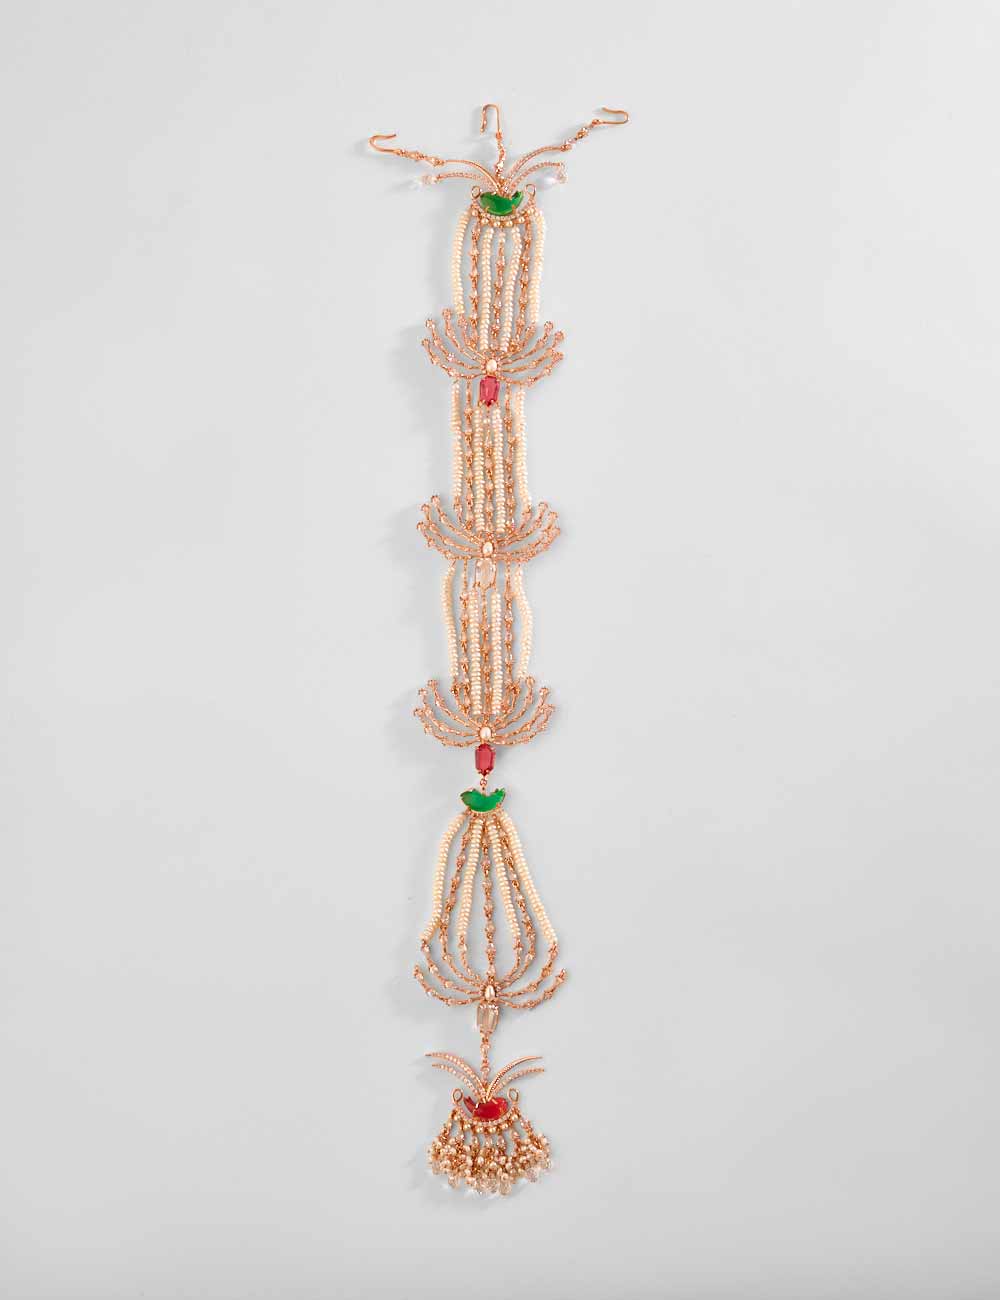 The Faena Couture Hair Accessory